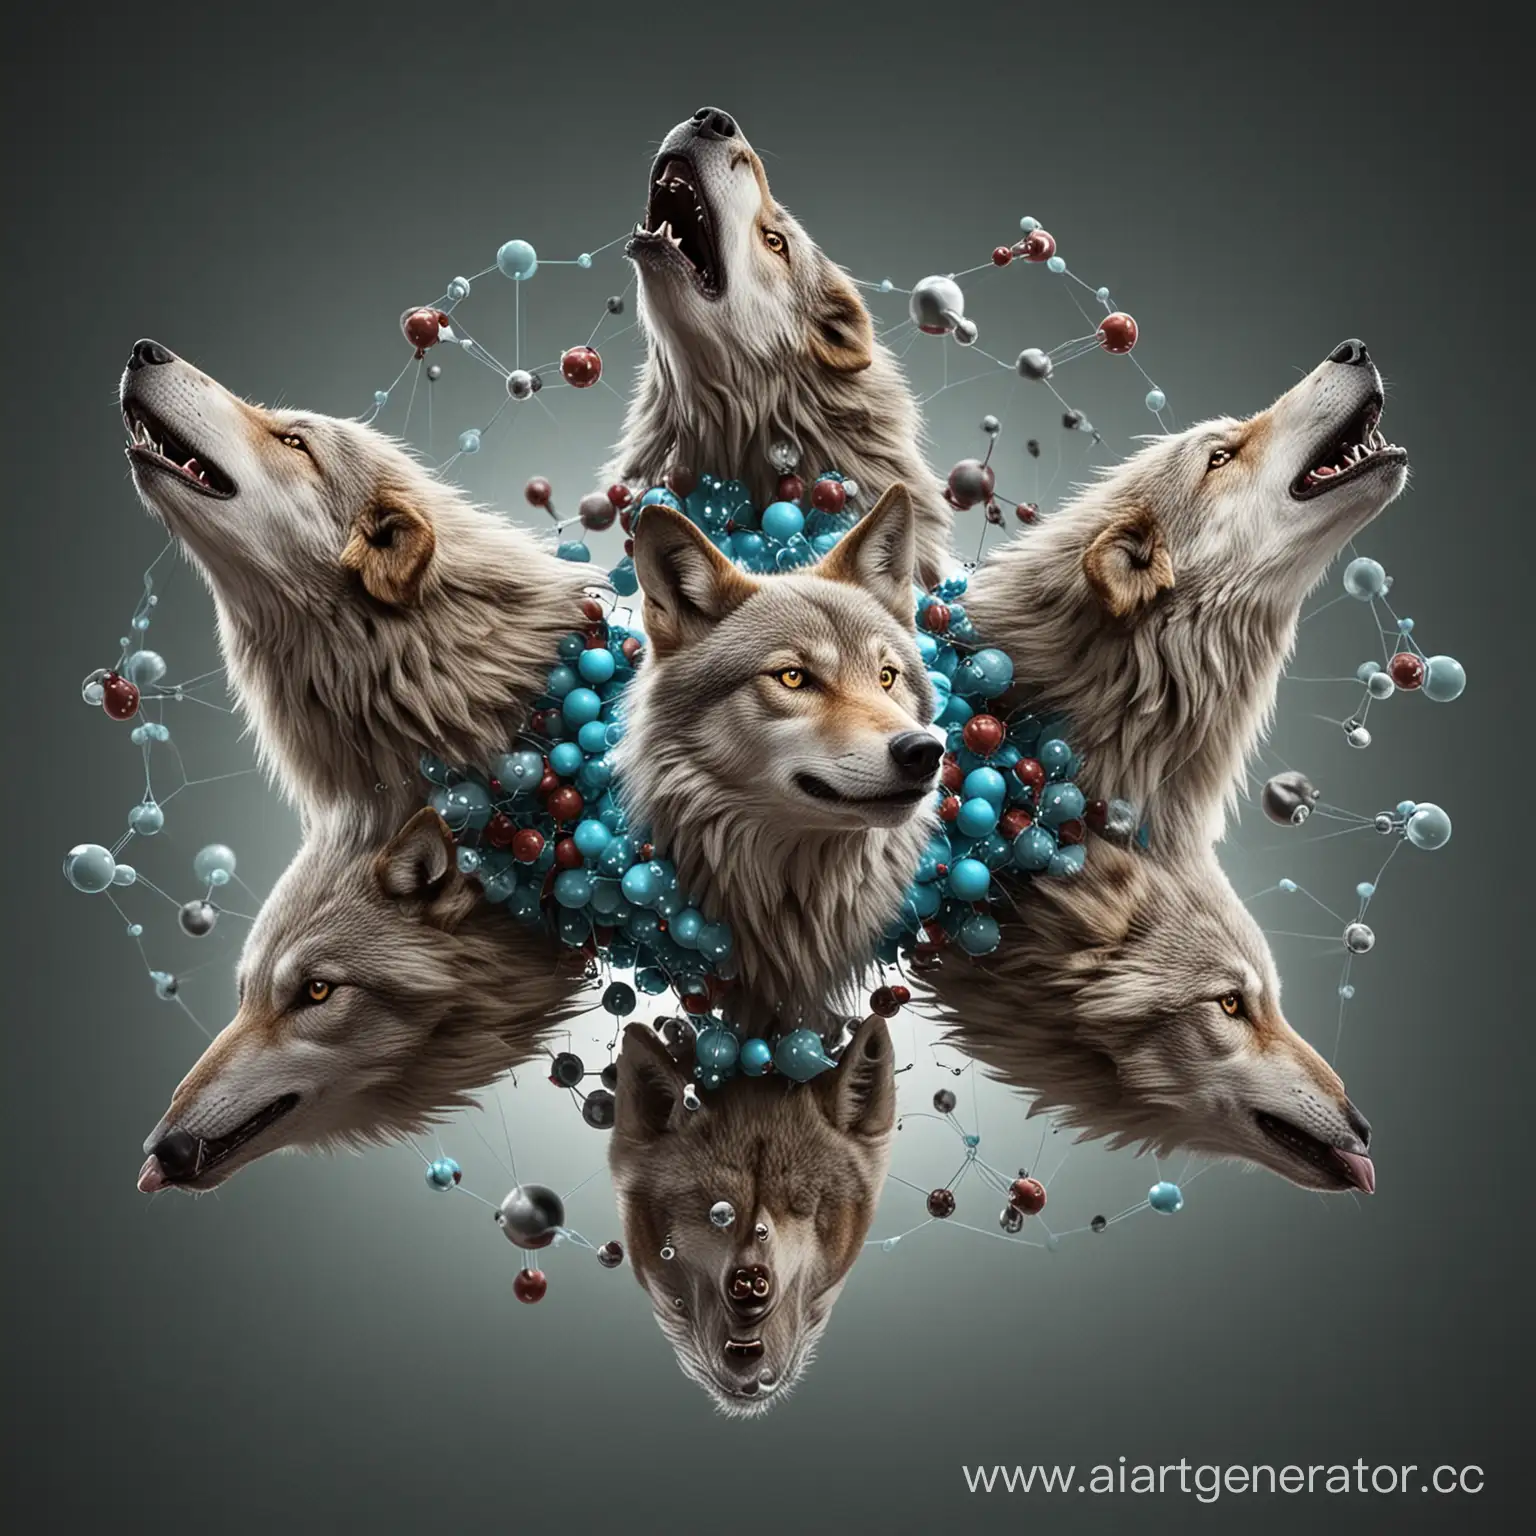 Aniline-Molecules-Swirling-Around-Wolves-in-Nature